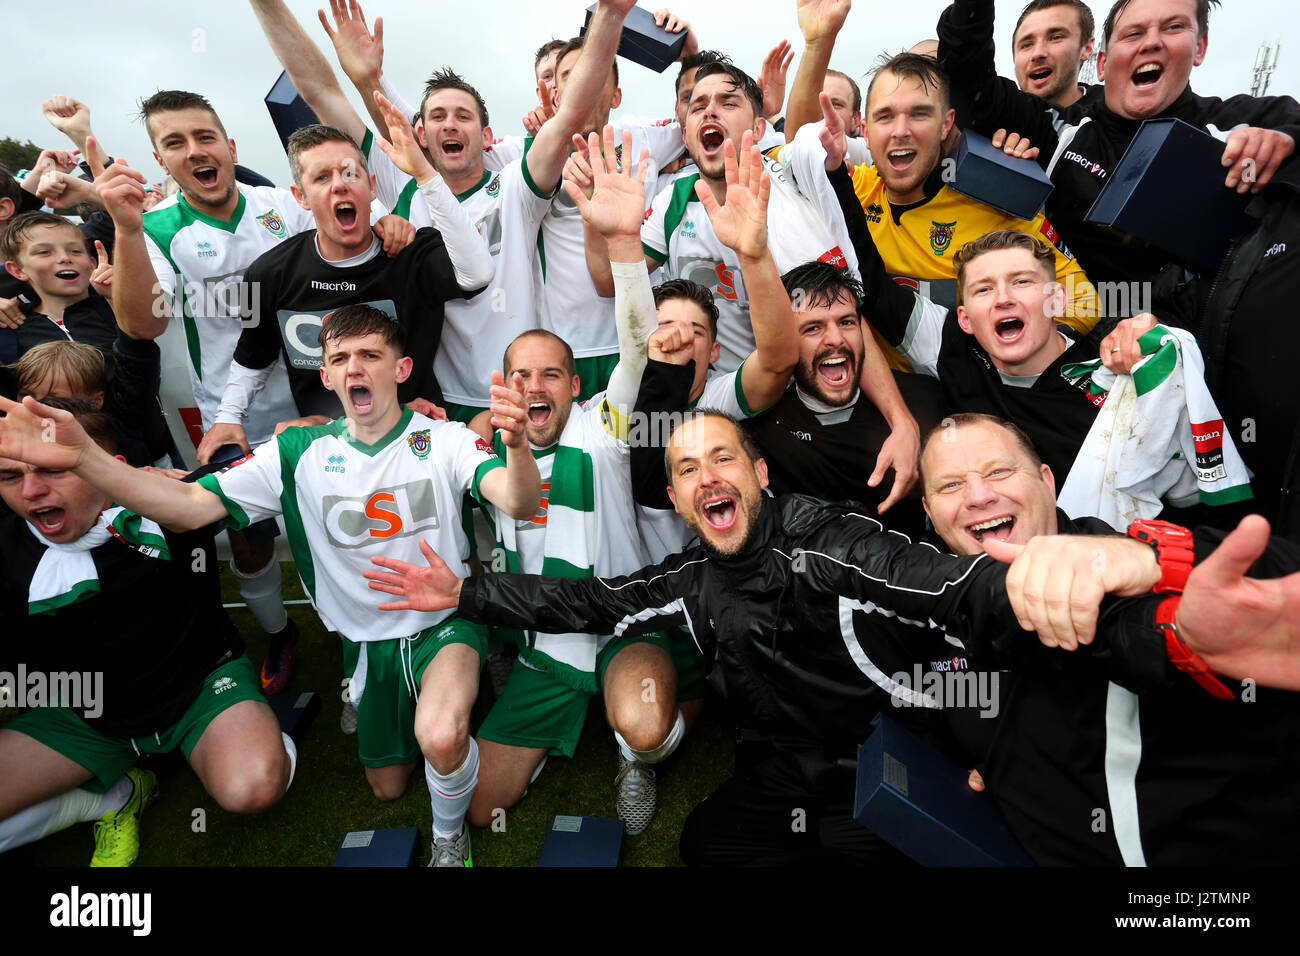 Bognor Regis, UK. 01st May, 2017. Bognor Regis, UK. Bognor Regis Football Club pictured celebrating beating Dulwich Hamlet to win the Ryman Football League Season 2016- 2107 Premier Division Play-off Final to be promoted to the National League South. Credit: Sam Stephenson/Alamy Live News Stock Photo